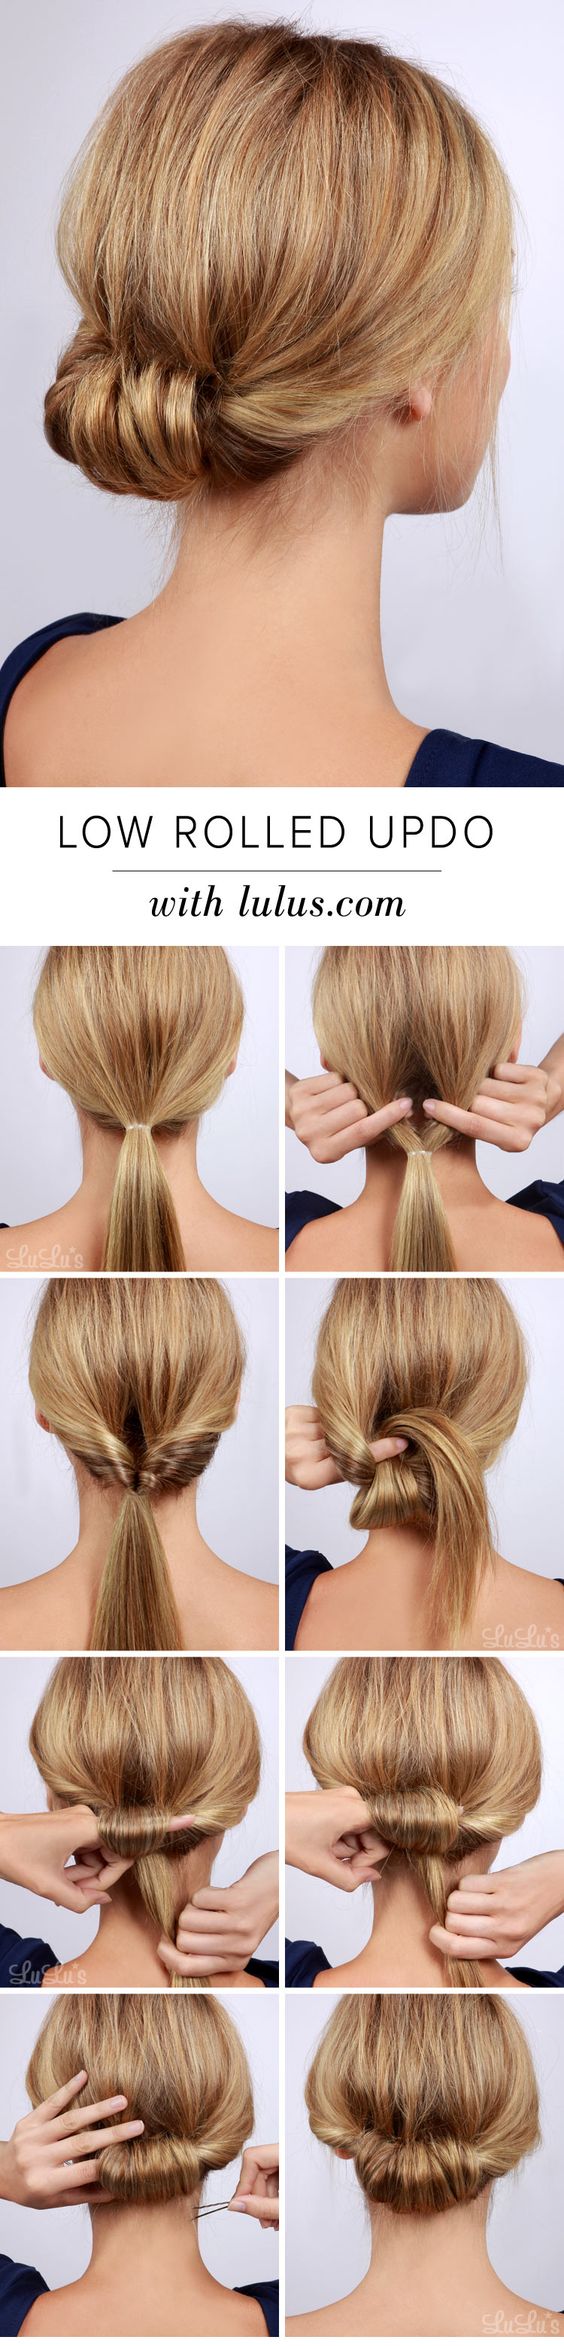 Easy Hairstyles for Short Hair: Quick Styles You Can Do at Home - Easy  Fashion for Moms